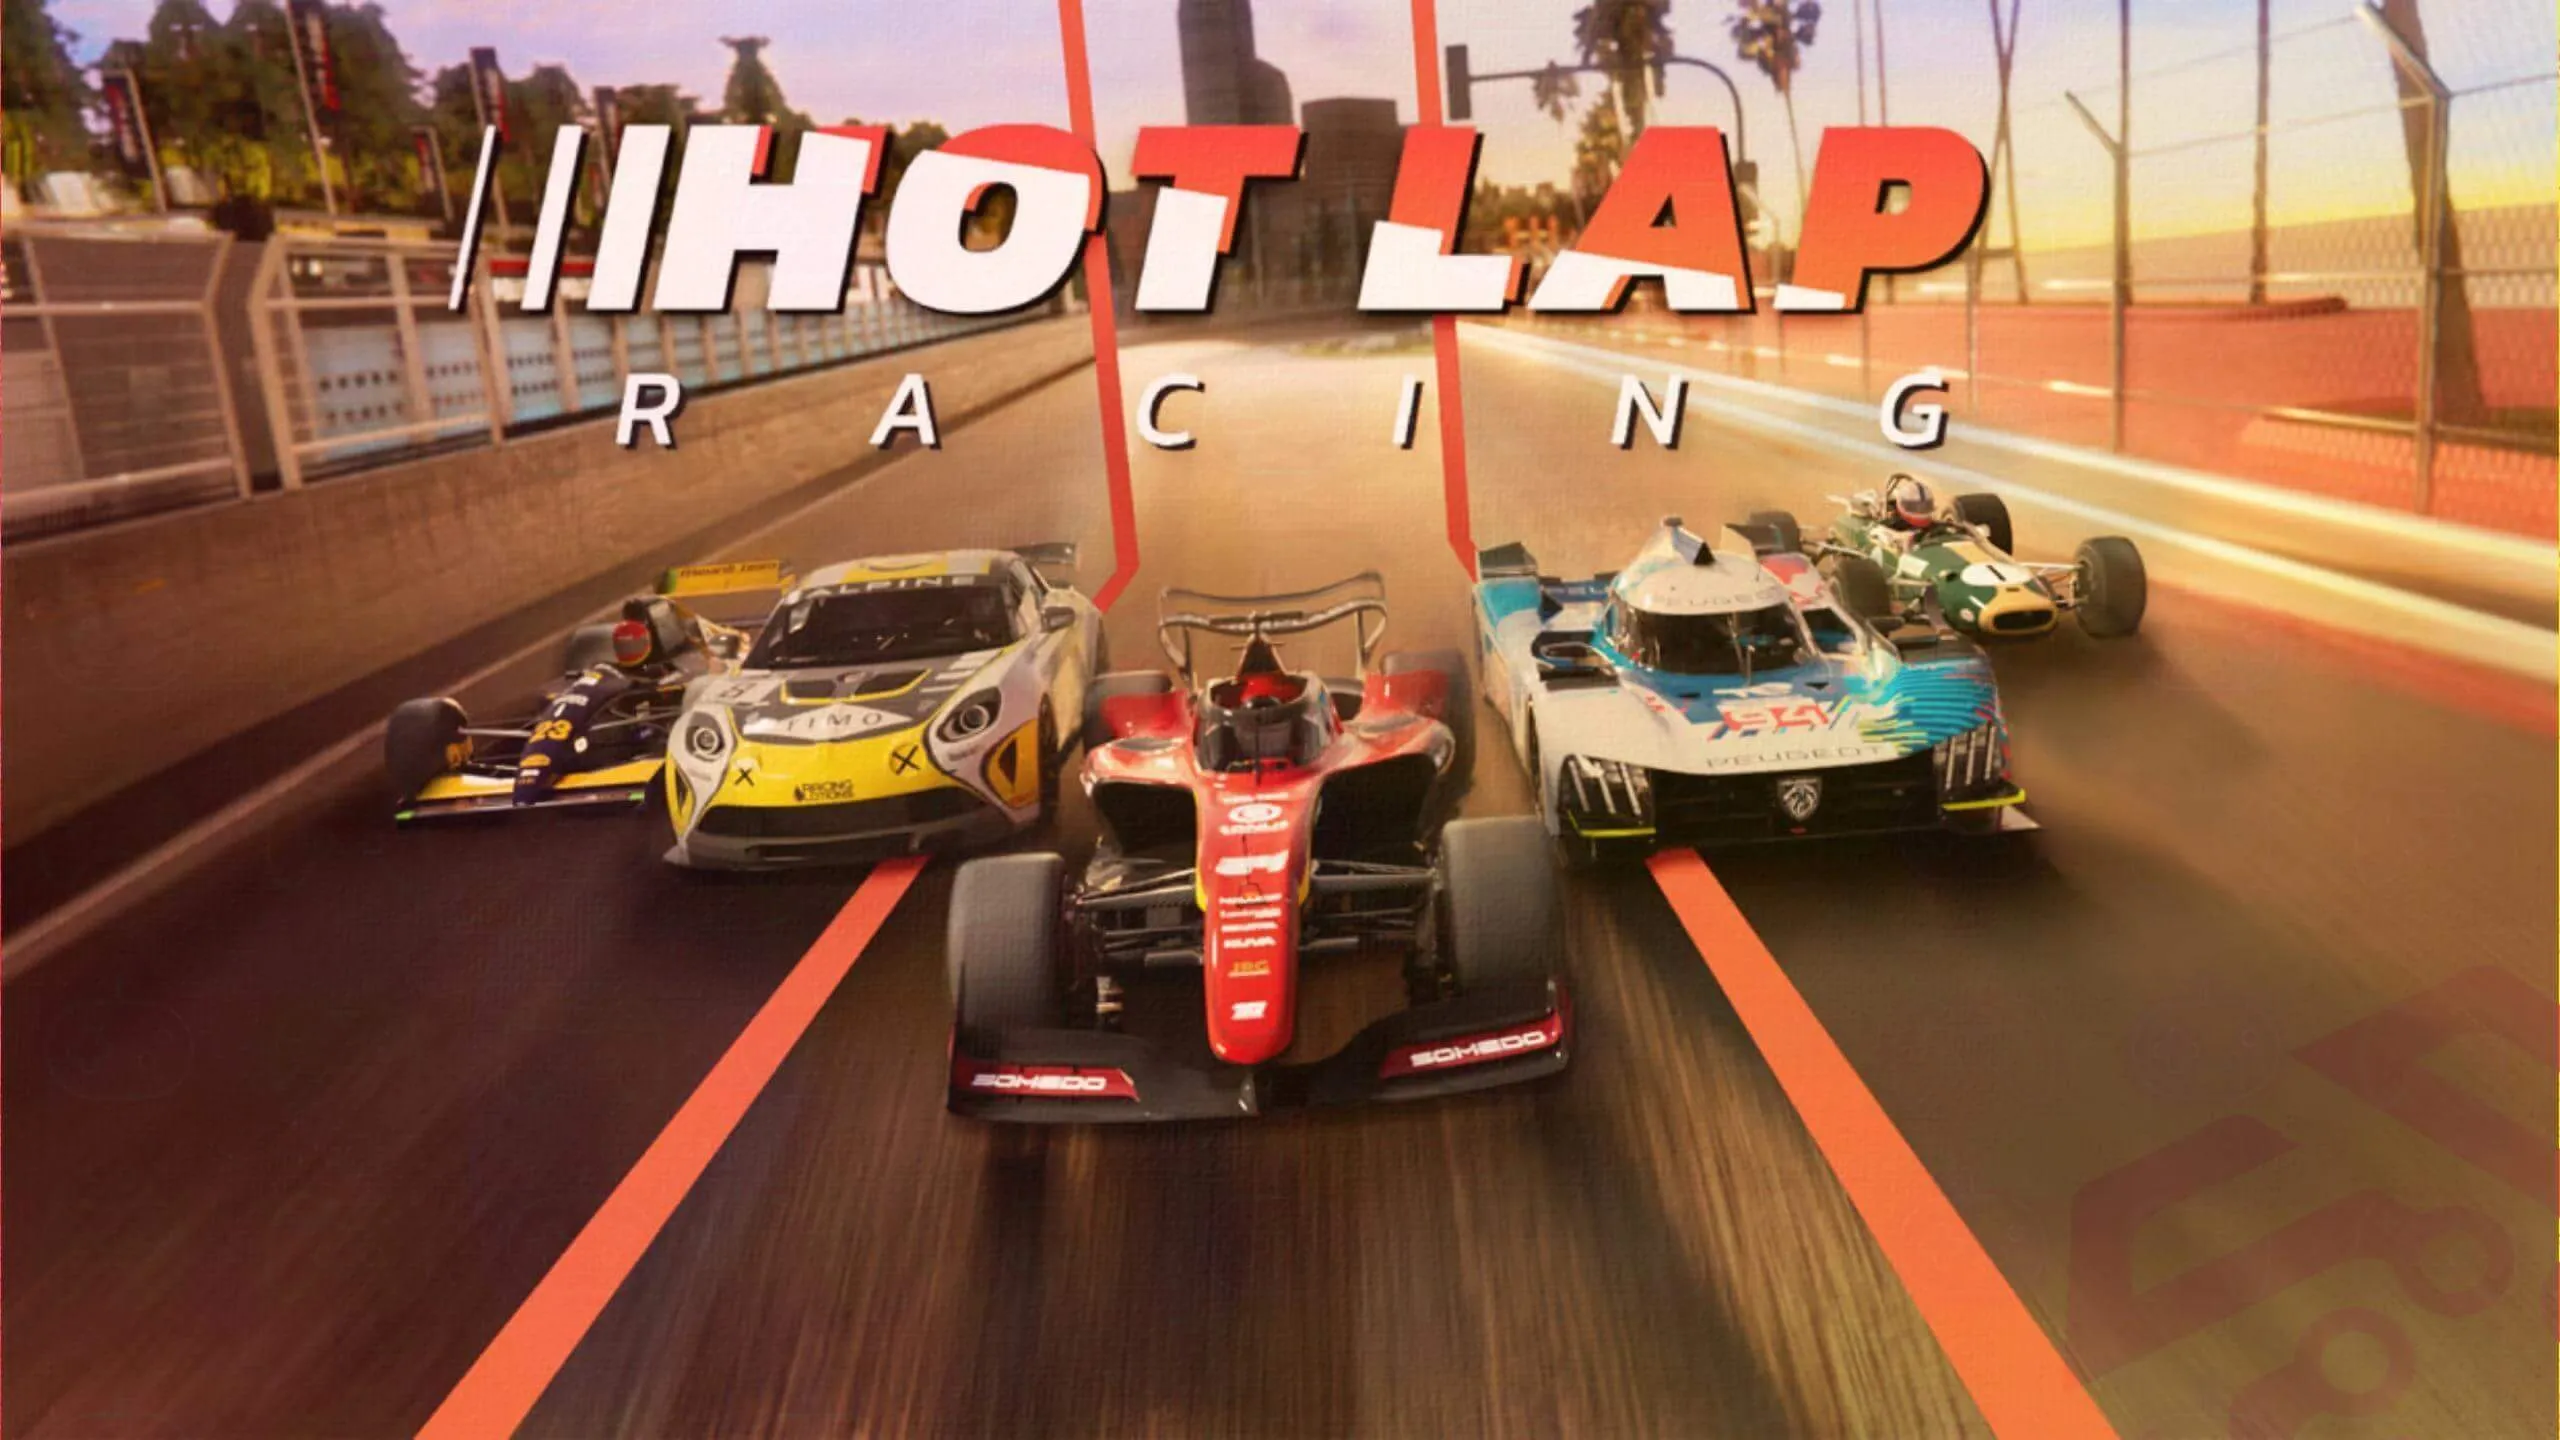 Hot Lap Racing: F1 bolids on the race